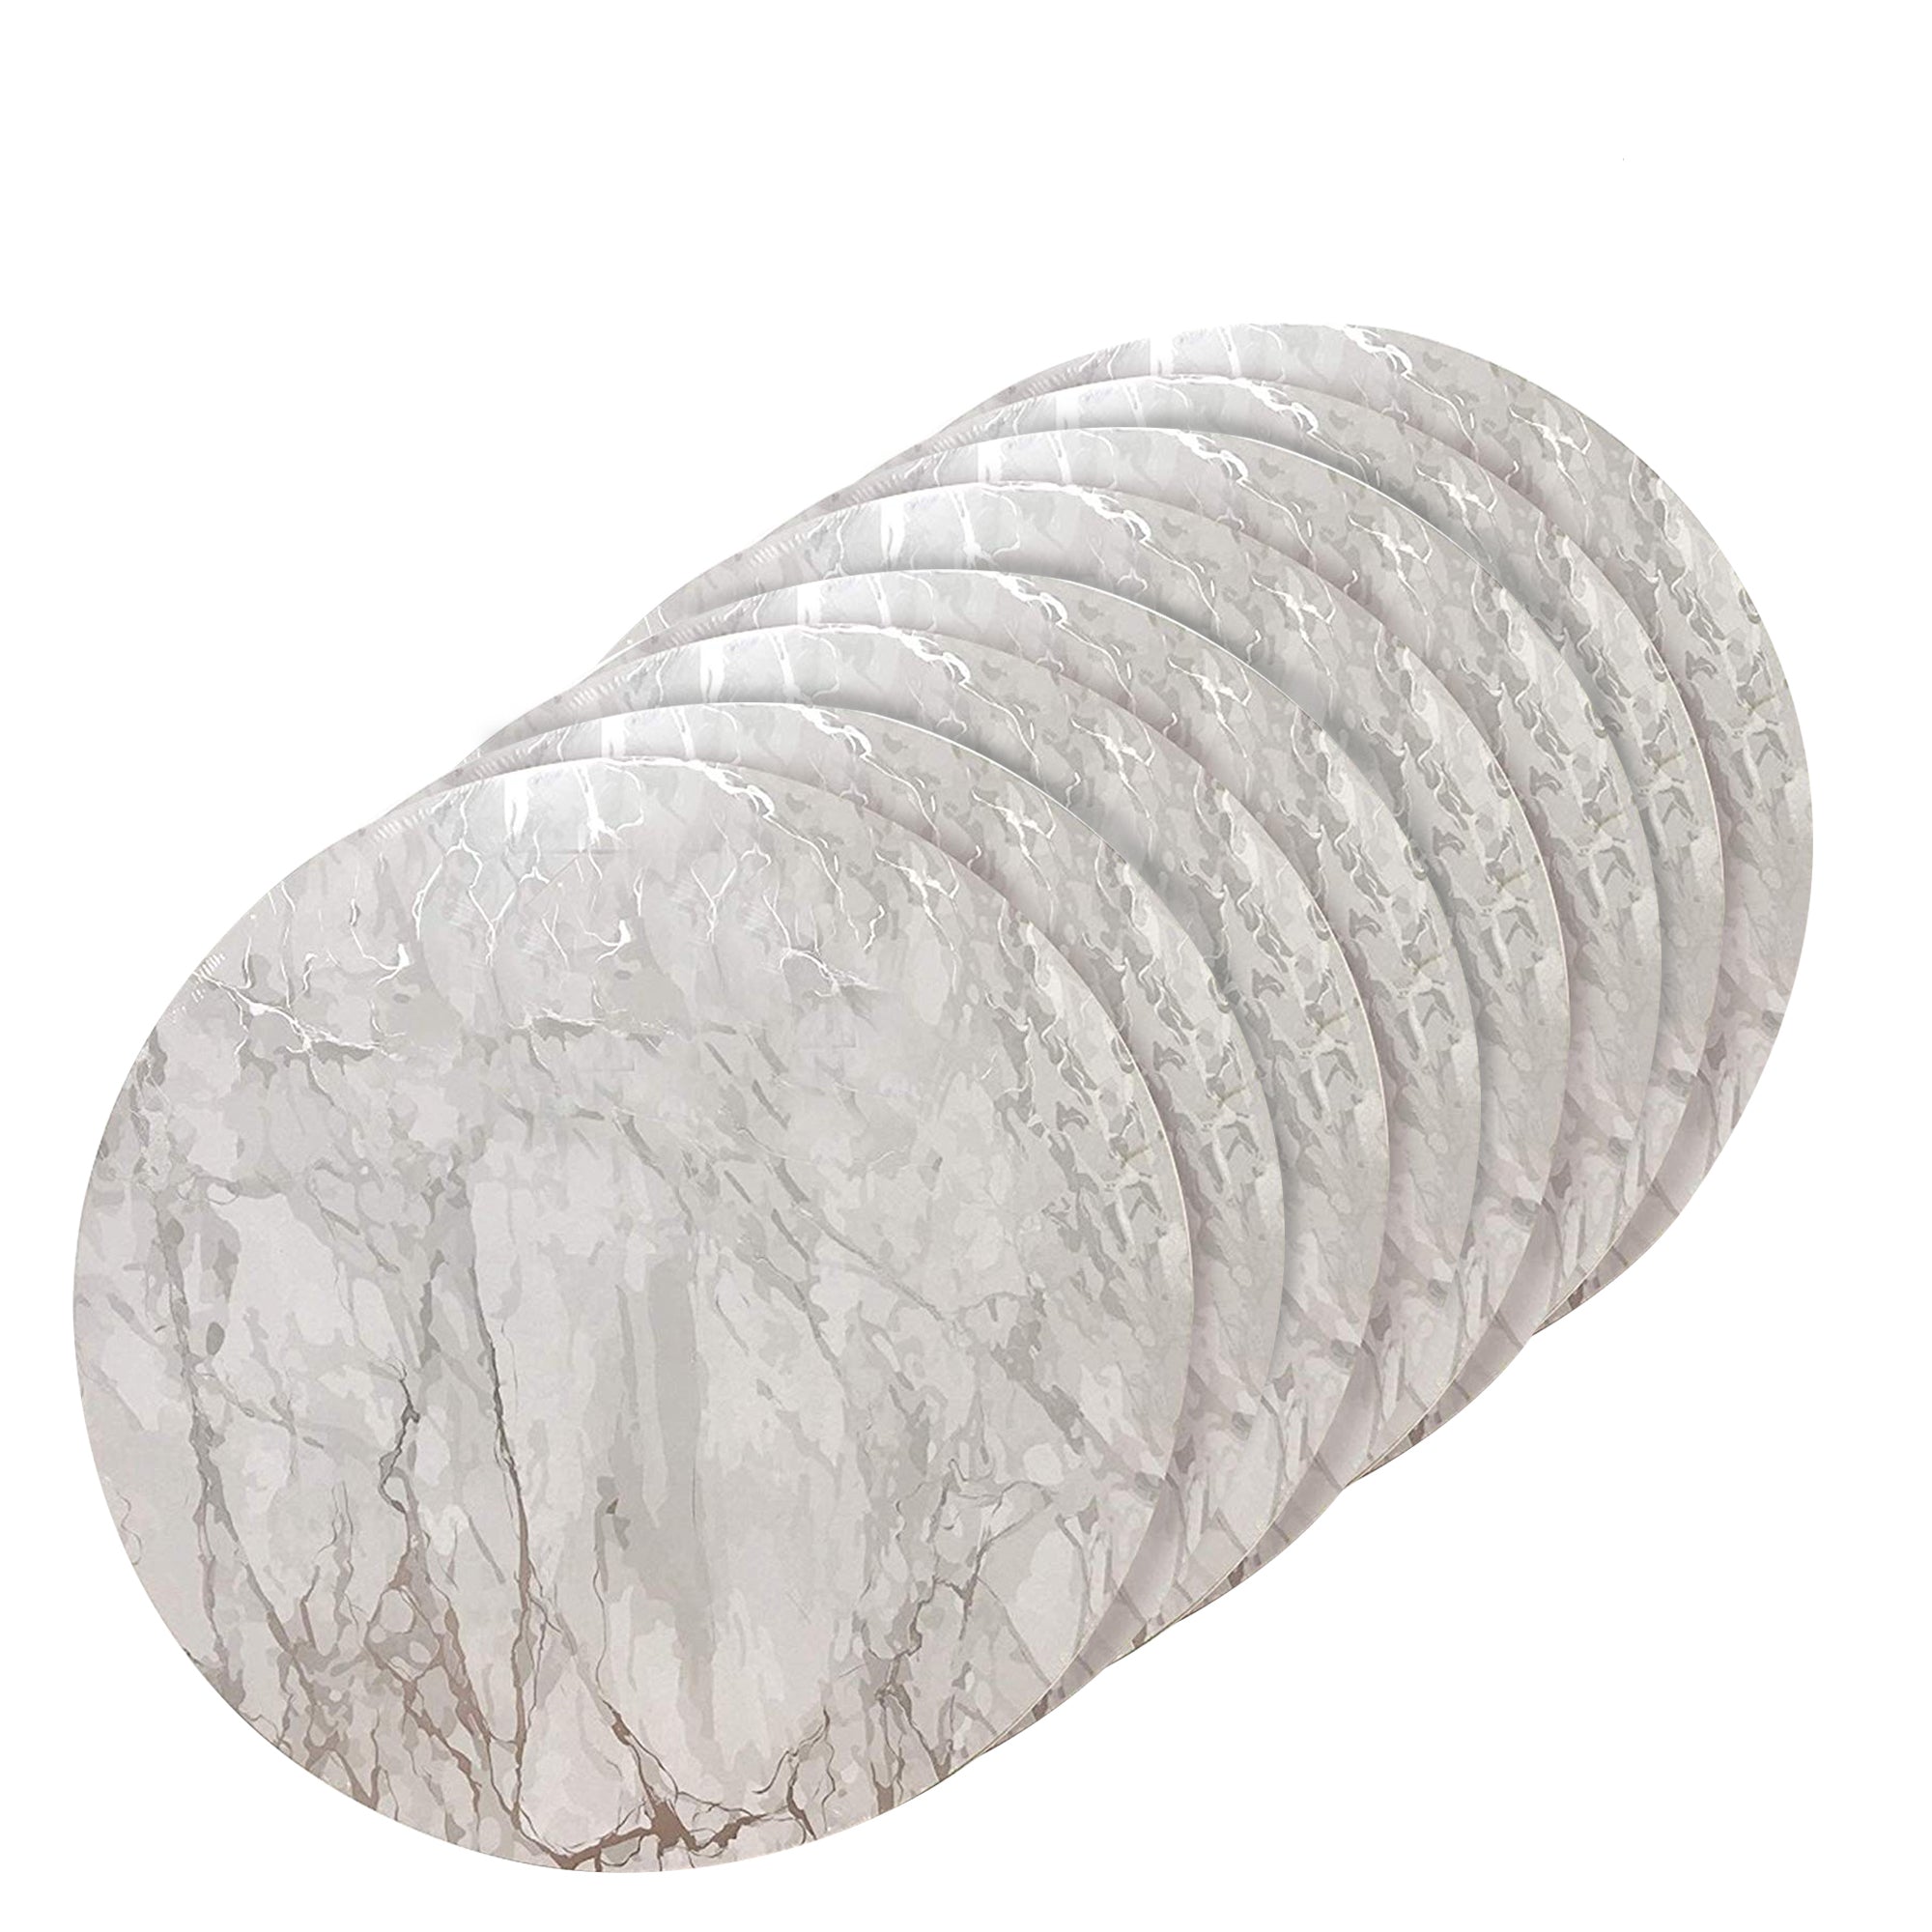 Dainty Home Marble Cork Foil Printed Marble Granite Designed Thick Cork Textured 15" x 15" Round Placemats